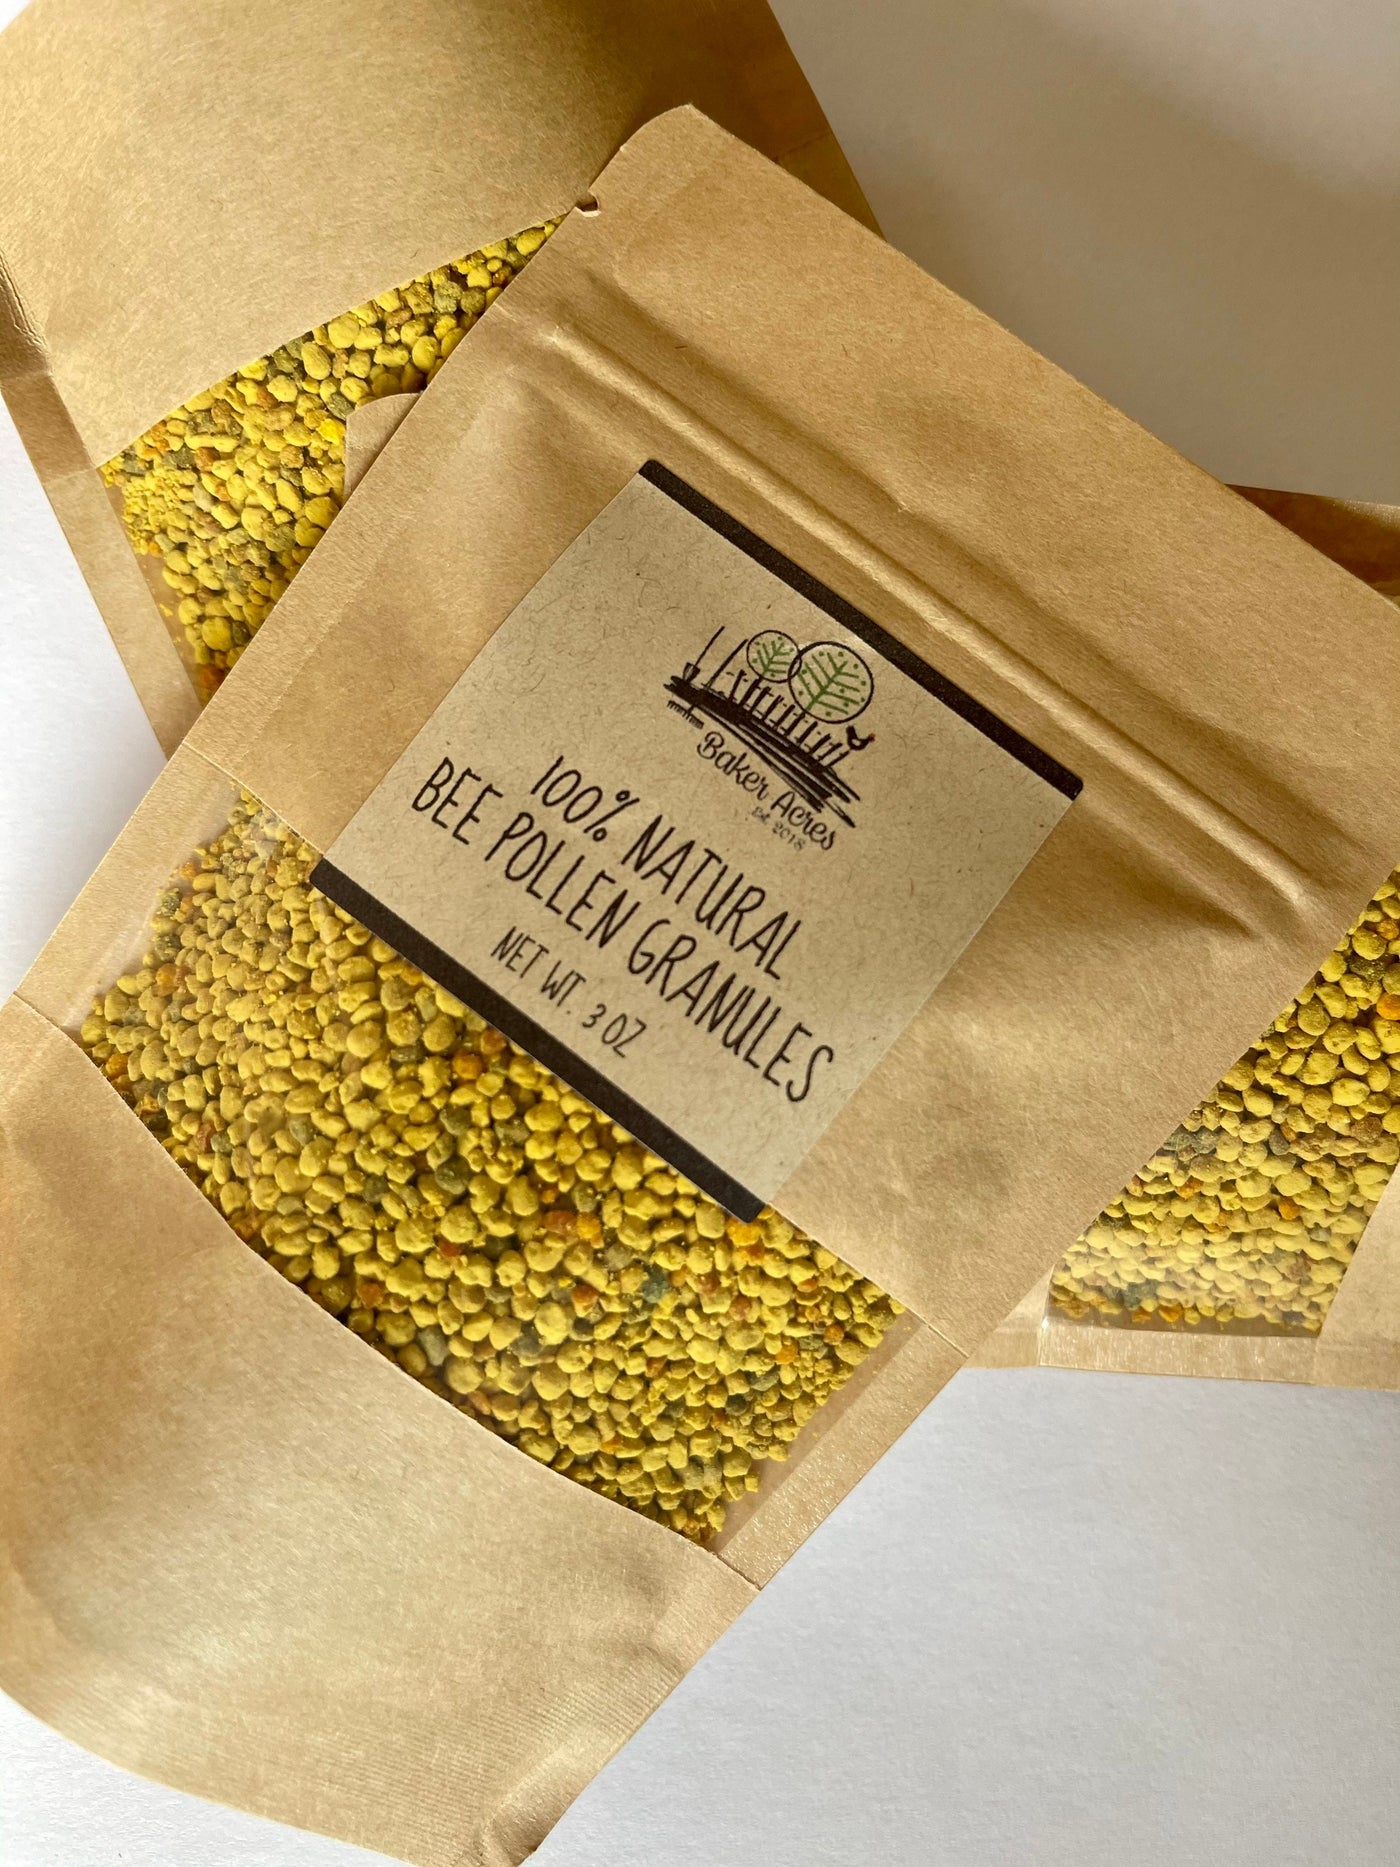 Raw Bee Pollen | Organic Bee Pollen Granules (3 Oz) | All Natural | 100% Pure | Healthy Superfood | Fresh Pollen | Resealable Pouch